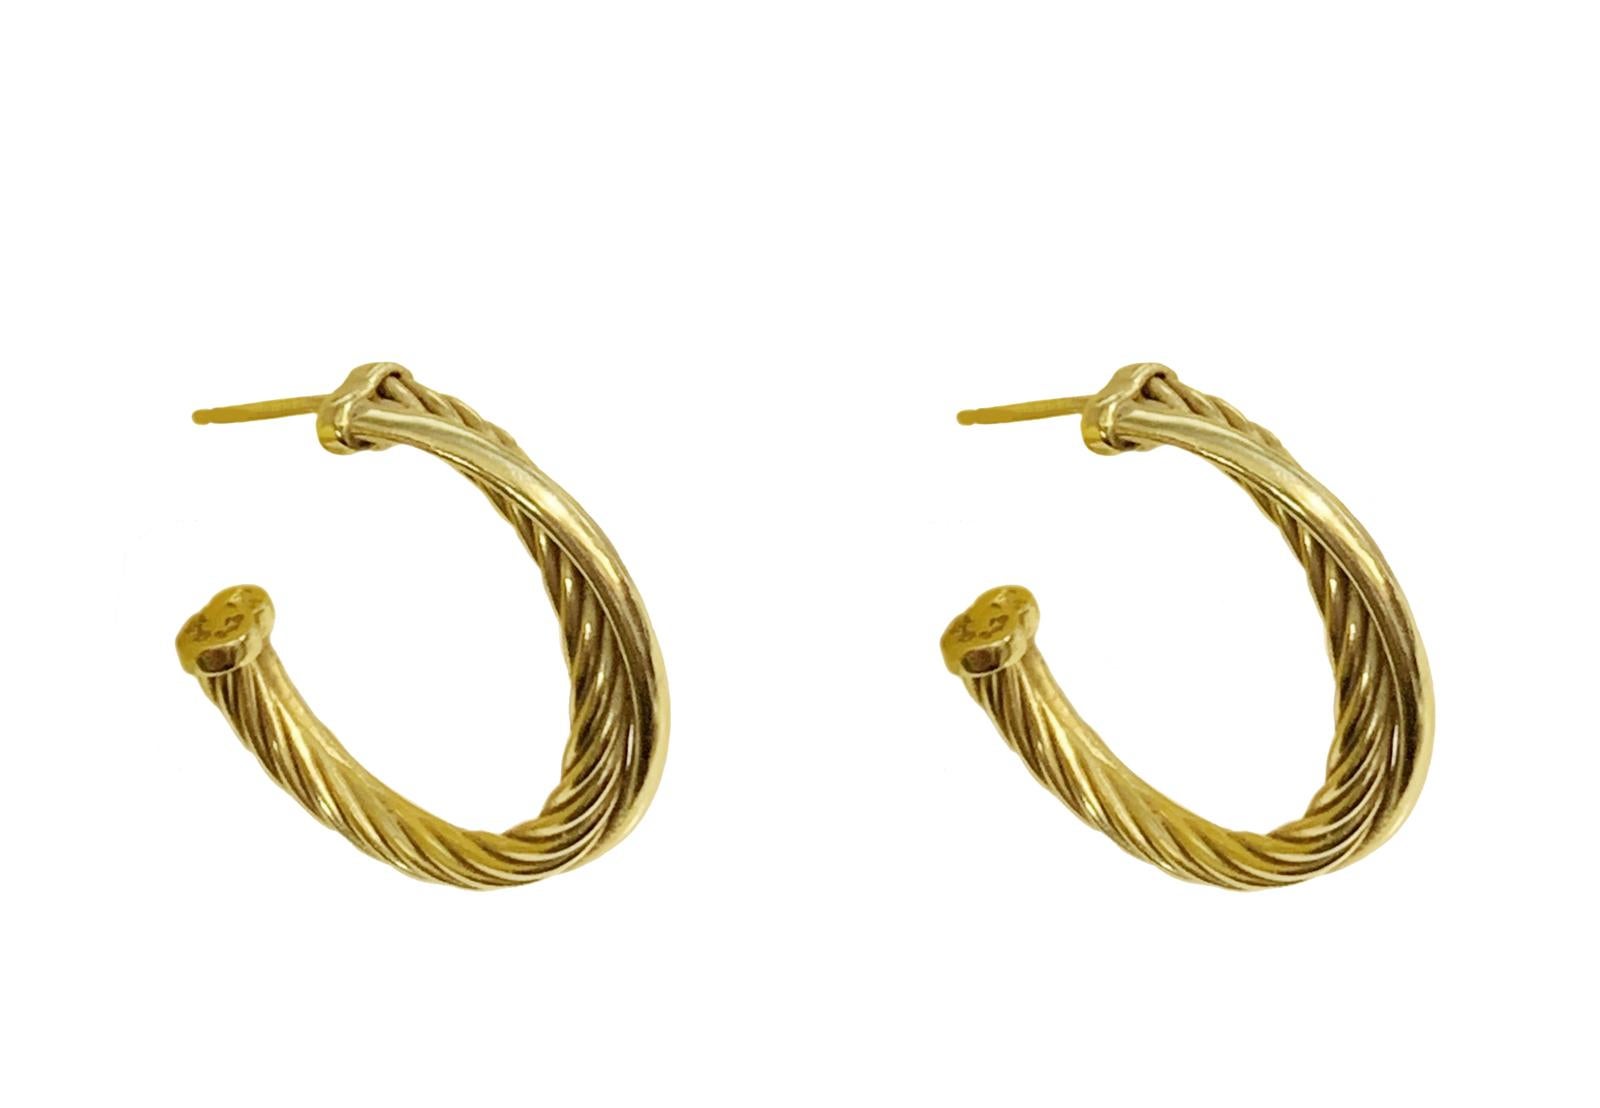 David Yurman 18 Karat Gold Hoop Earrings In Excellent Condition For Sale In New York, NY